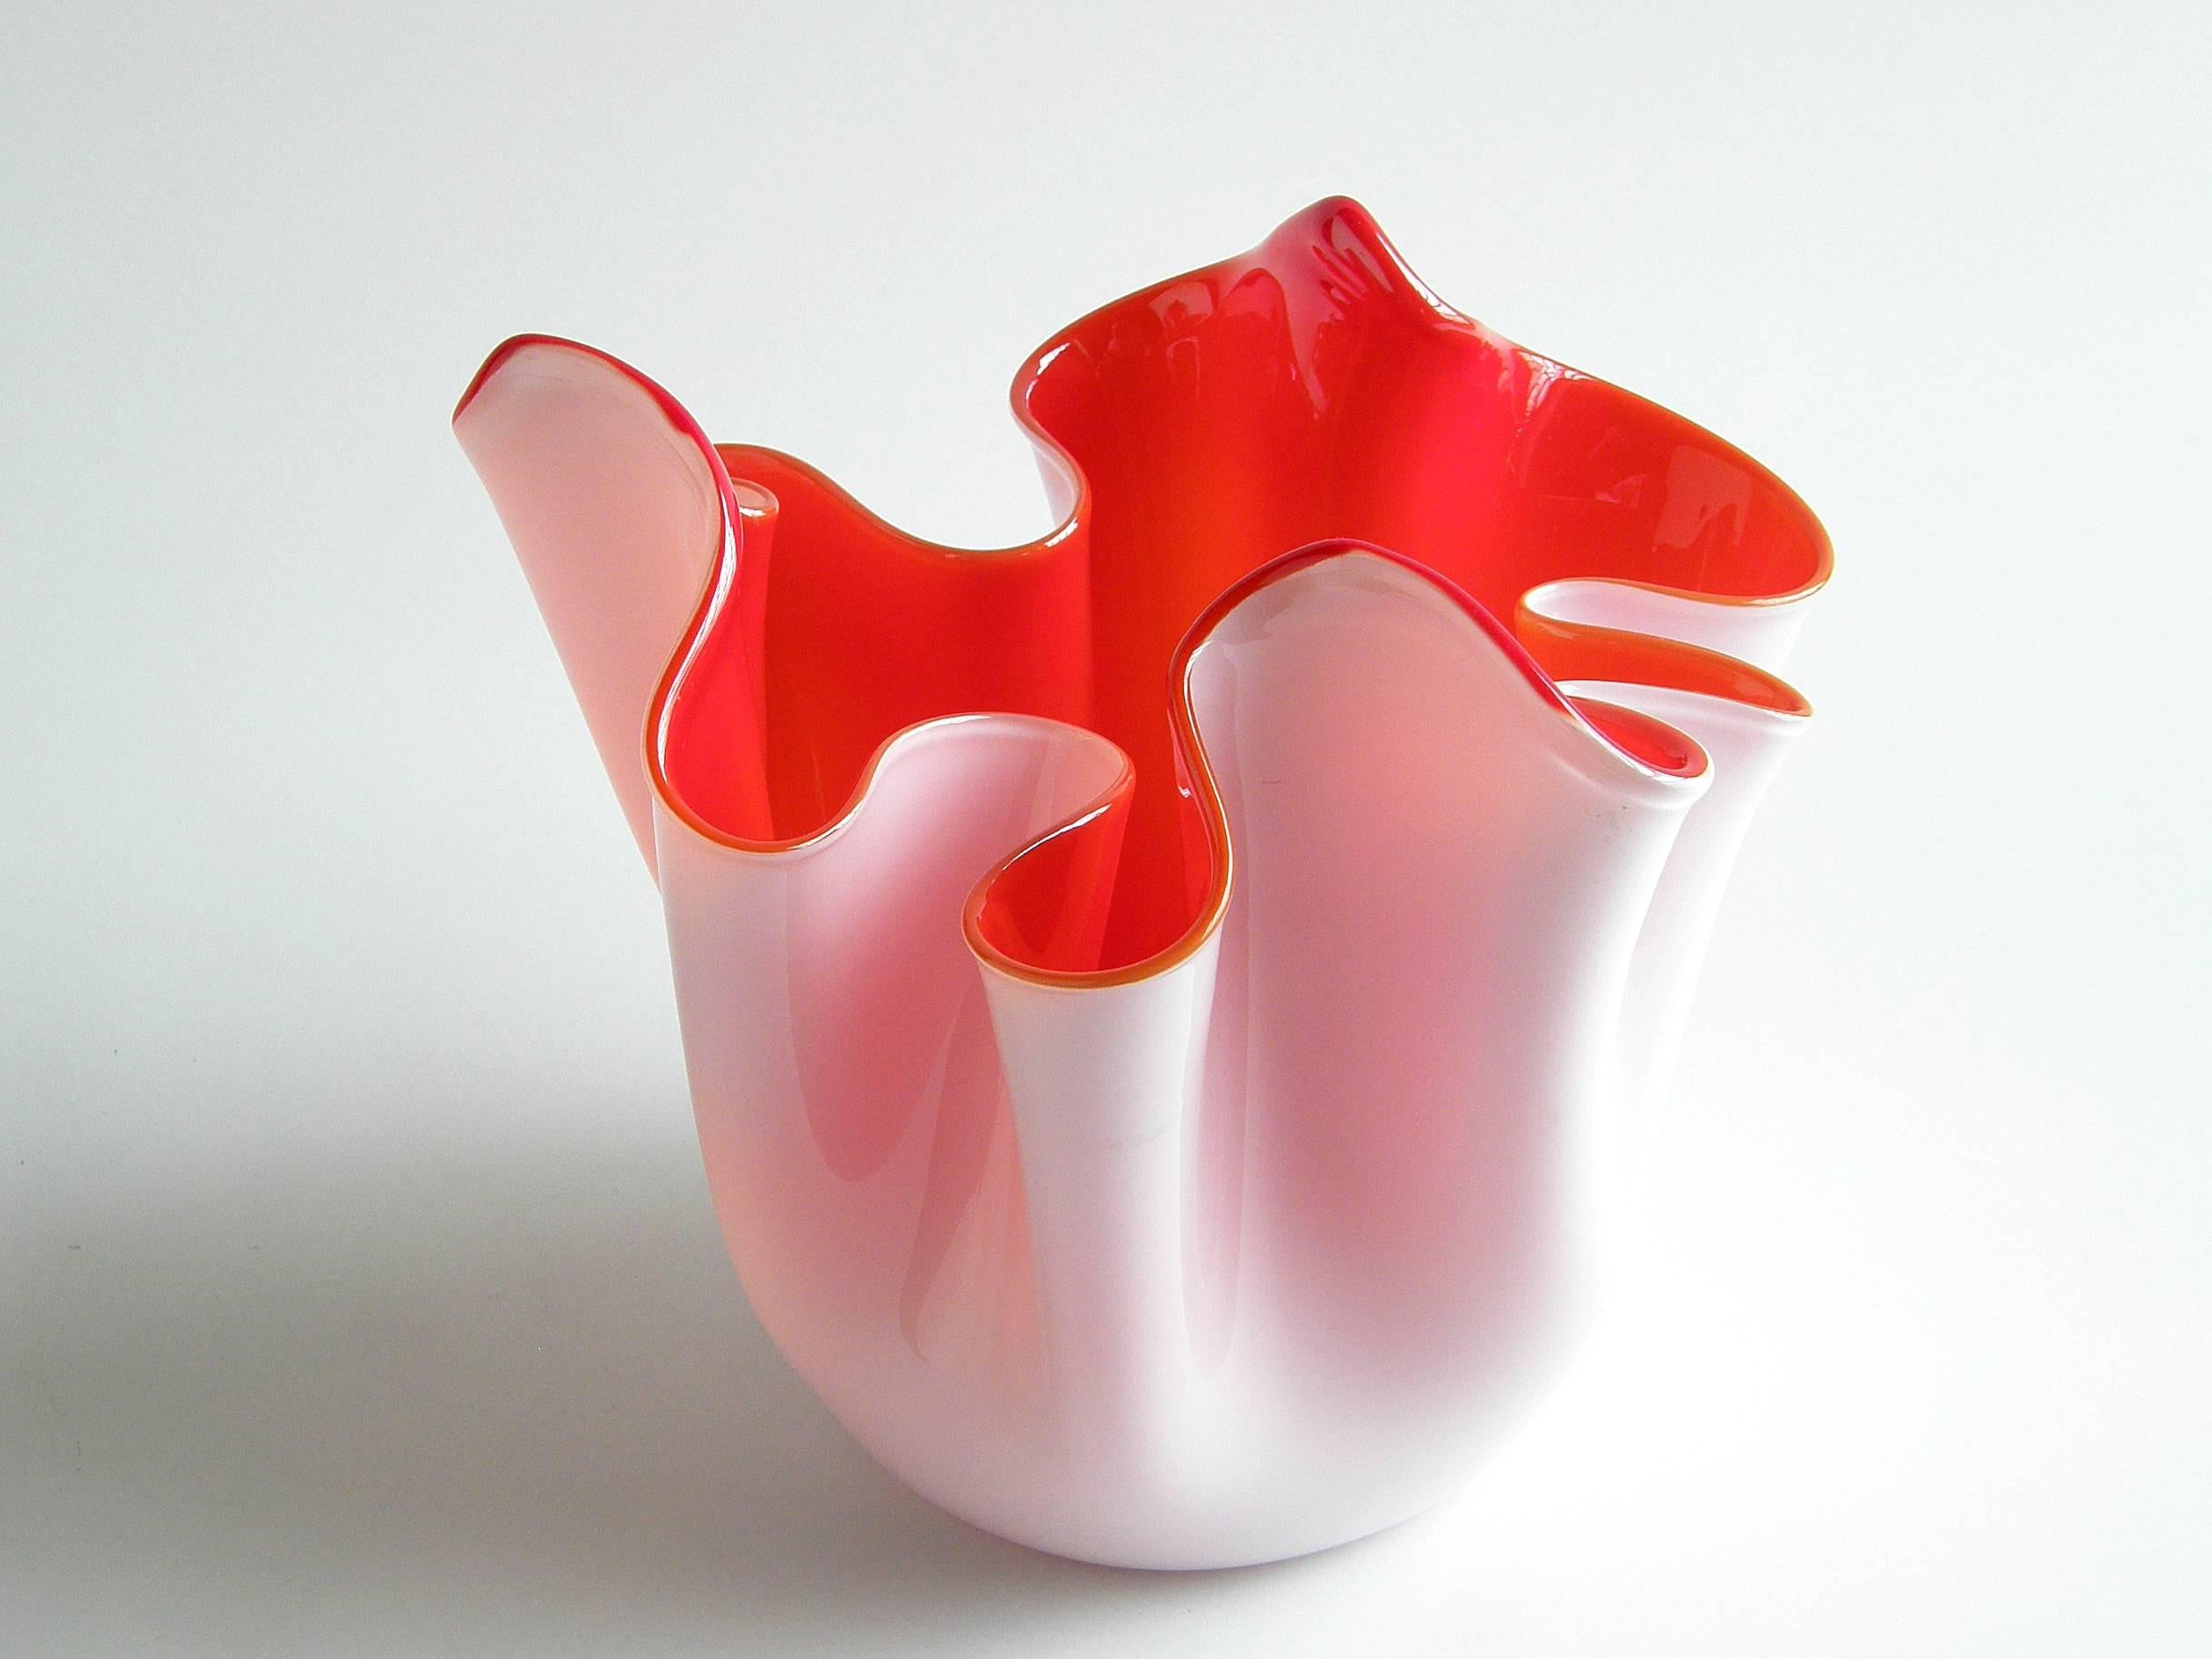 Wonderful, free-form handkerchief vase designed by Fulvio Bianconi for Venini of Murano, Italy. The rich red interior is cased in a white glass exterior. The undulating shape of this classic Venini 